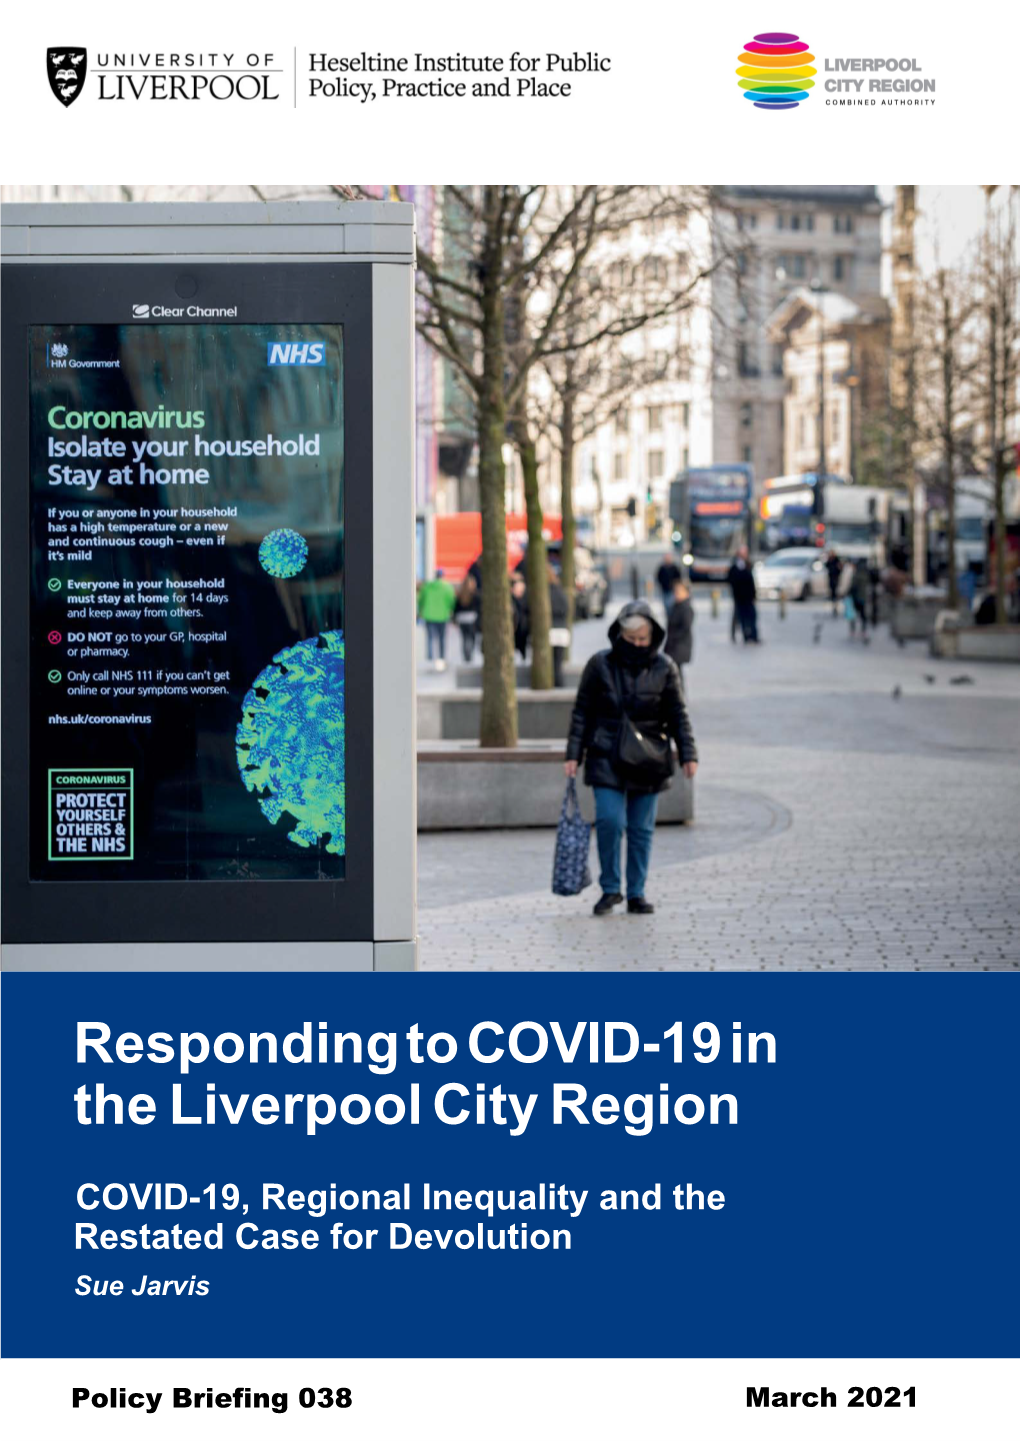 Responding to COVID-19 in the Liverpool City Region